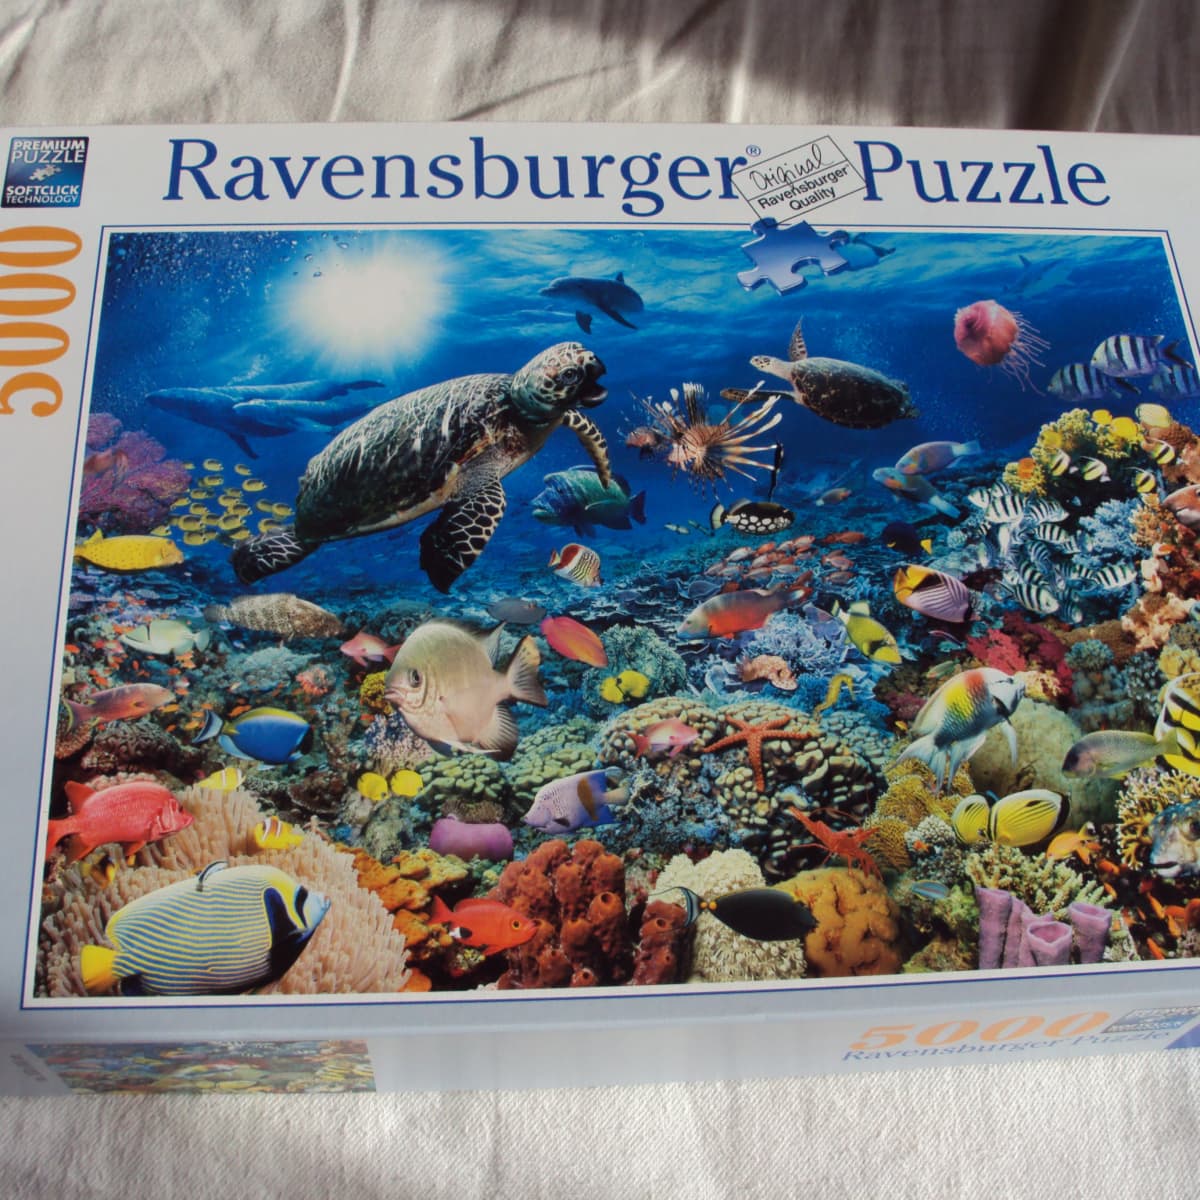 Adult Puzzle 5000 or Jigsaw Puzzle Families Kids Gifts 5000 Piece Puzzles Weißer Tiger-5000